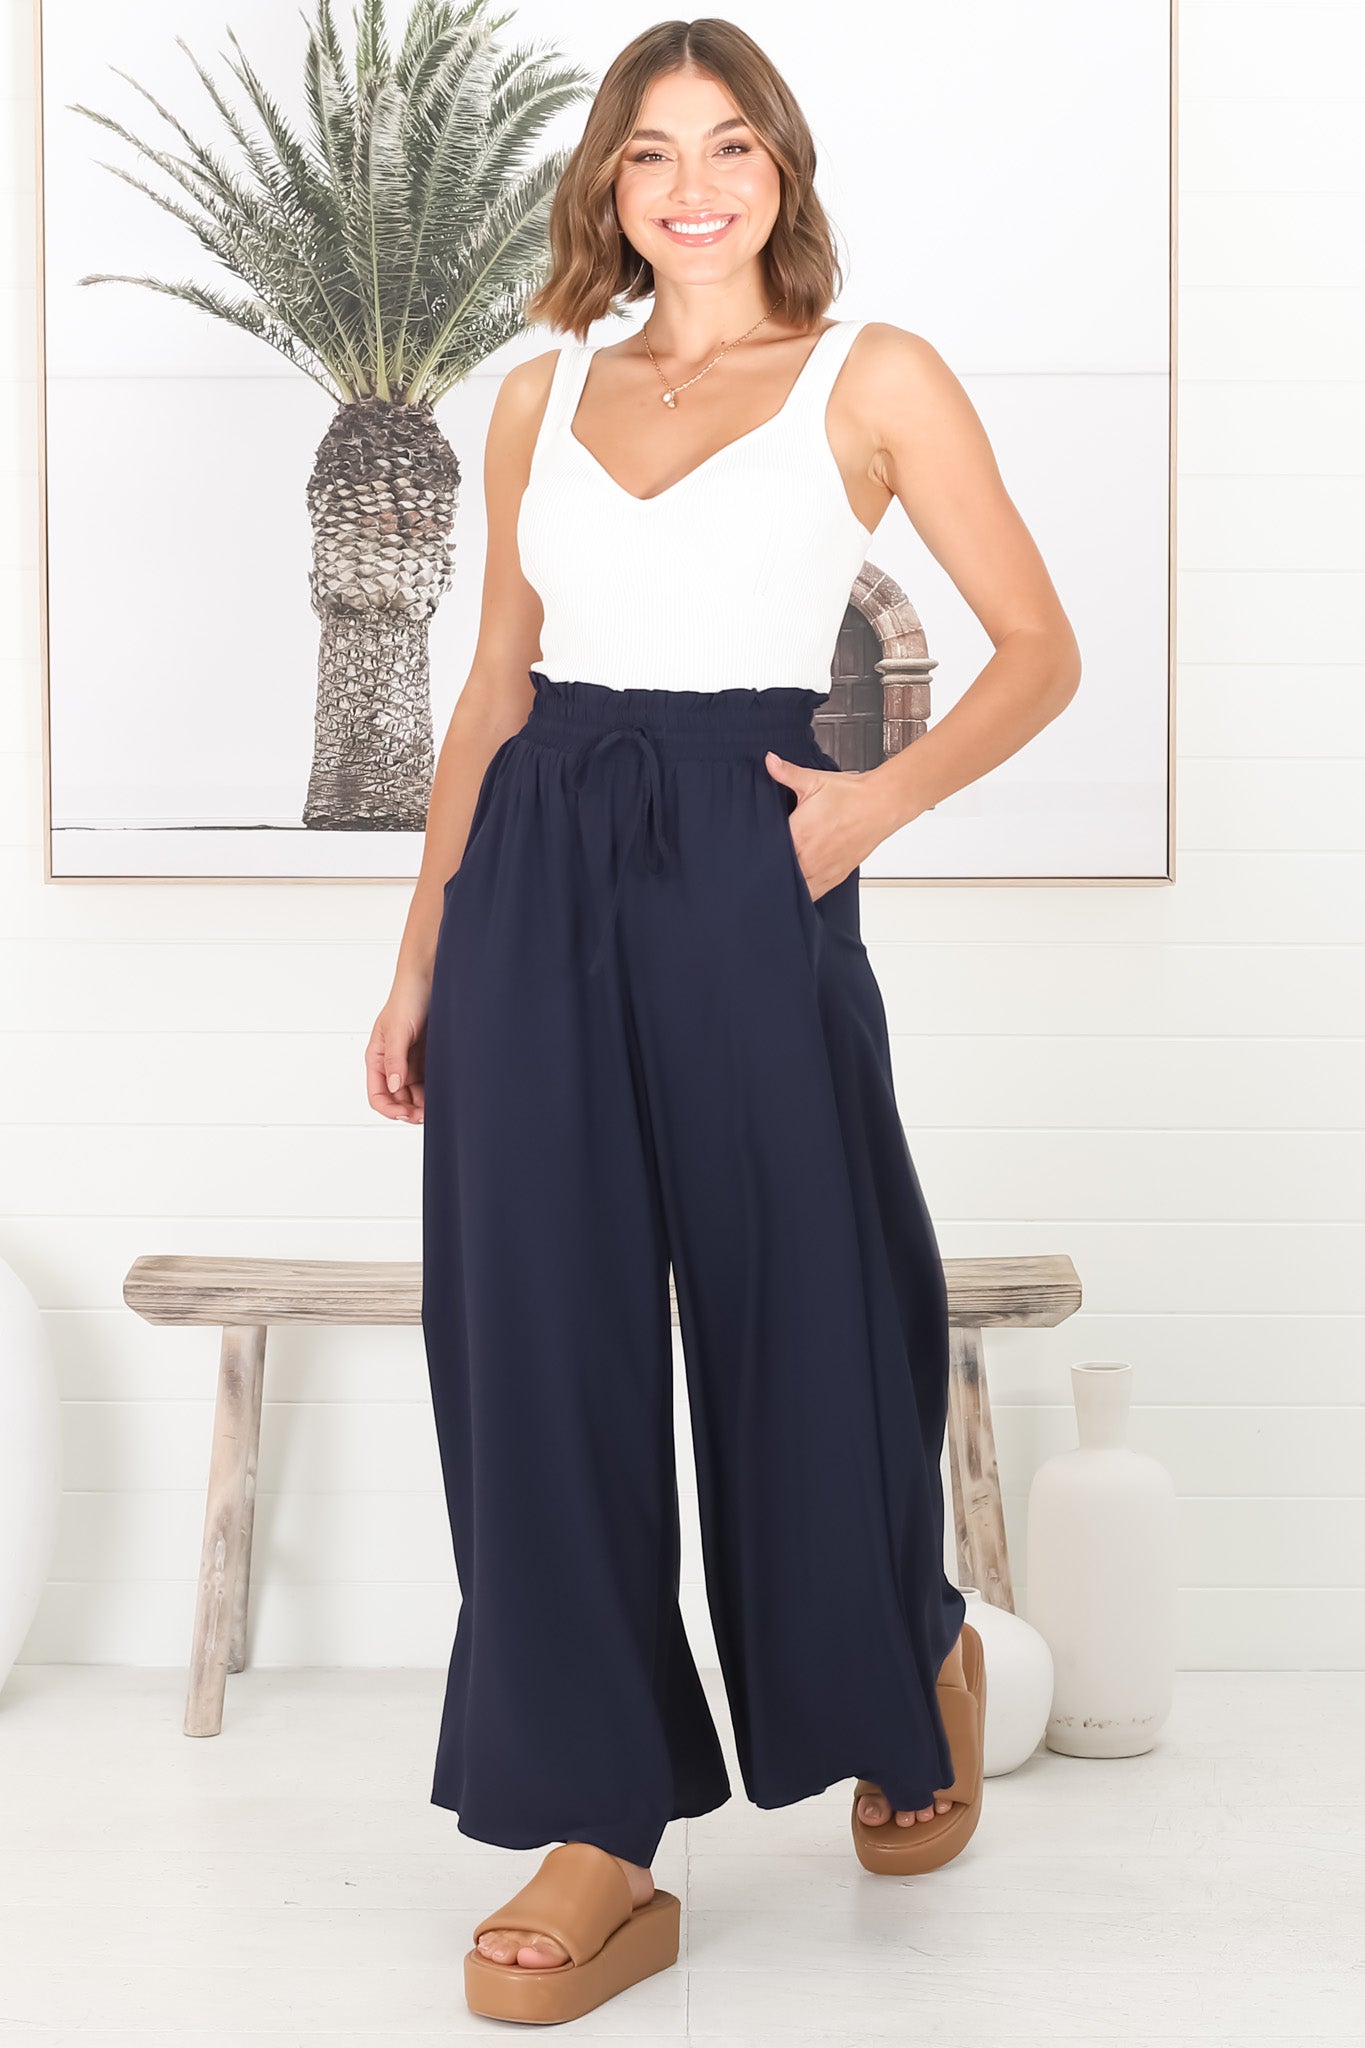 Charli Pants - Paper Bag High Waisted Wide Leg Pants in Navy